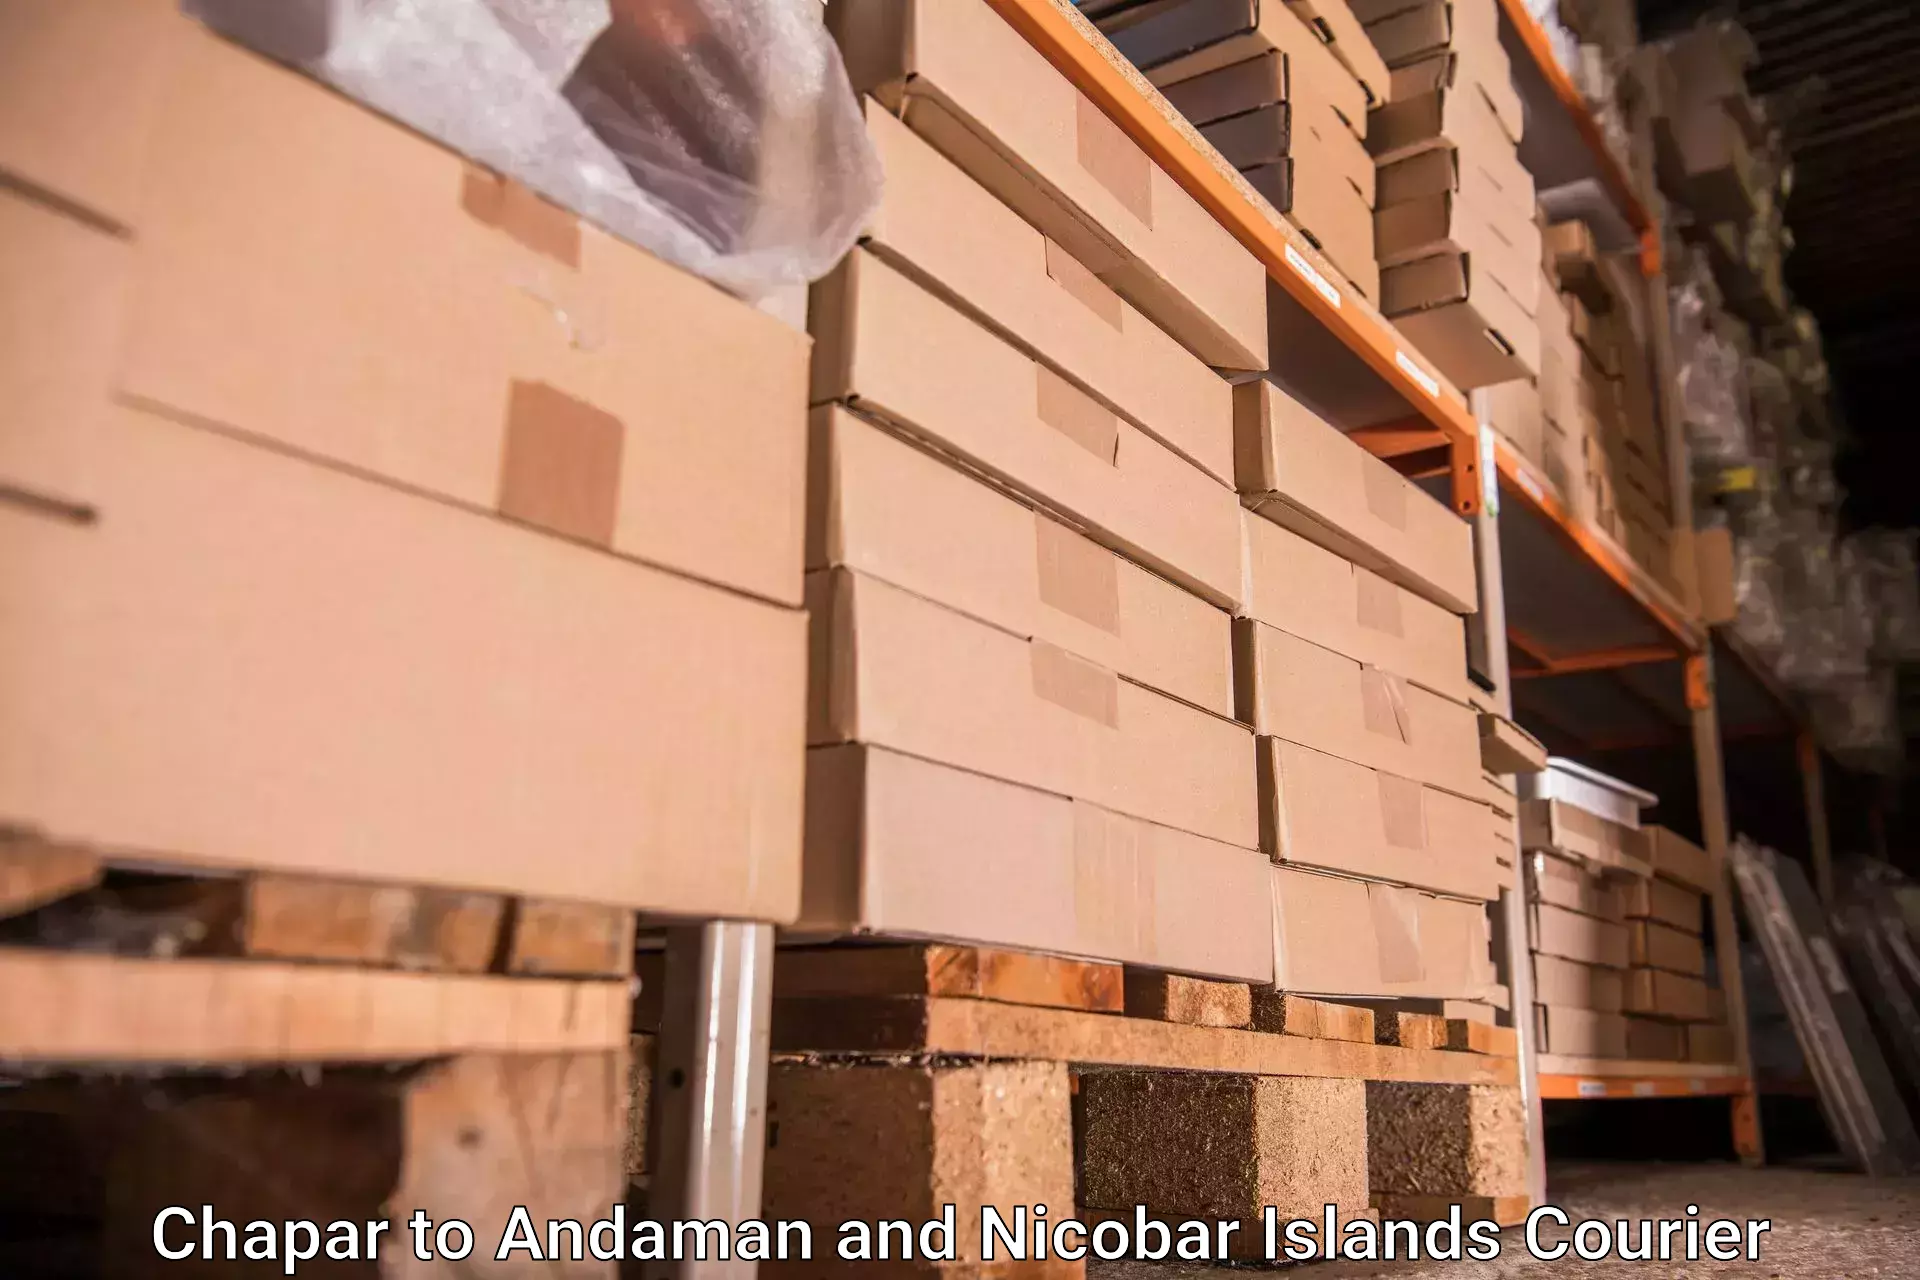 Automated luggage transport Chapar to Andaman and Nicobar Islands